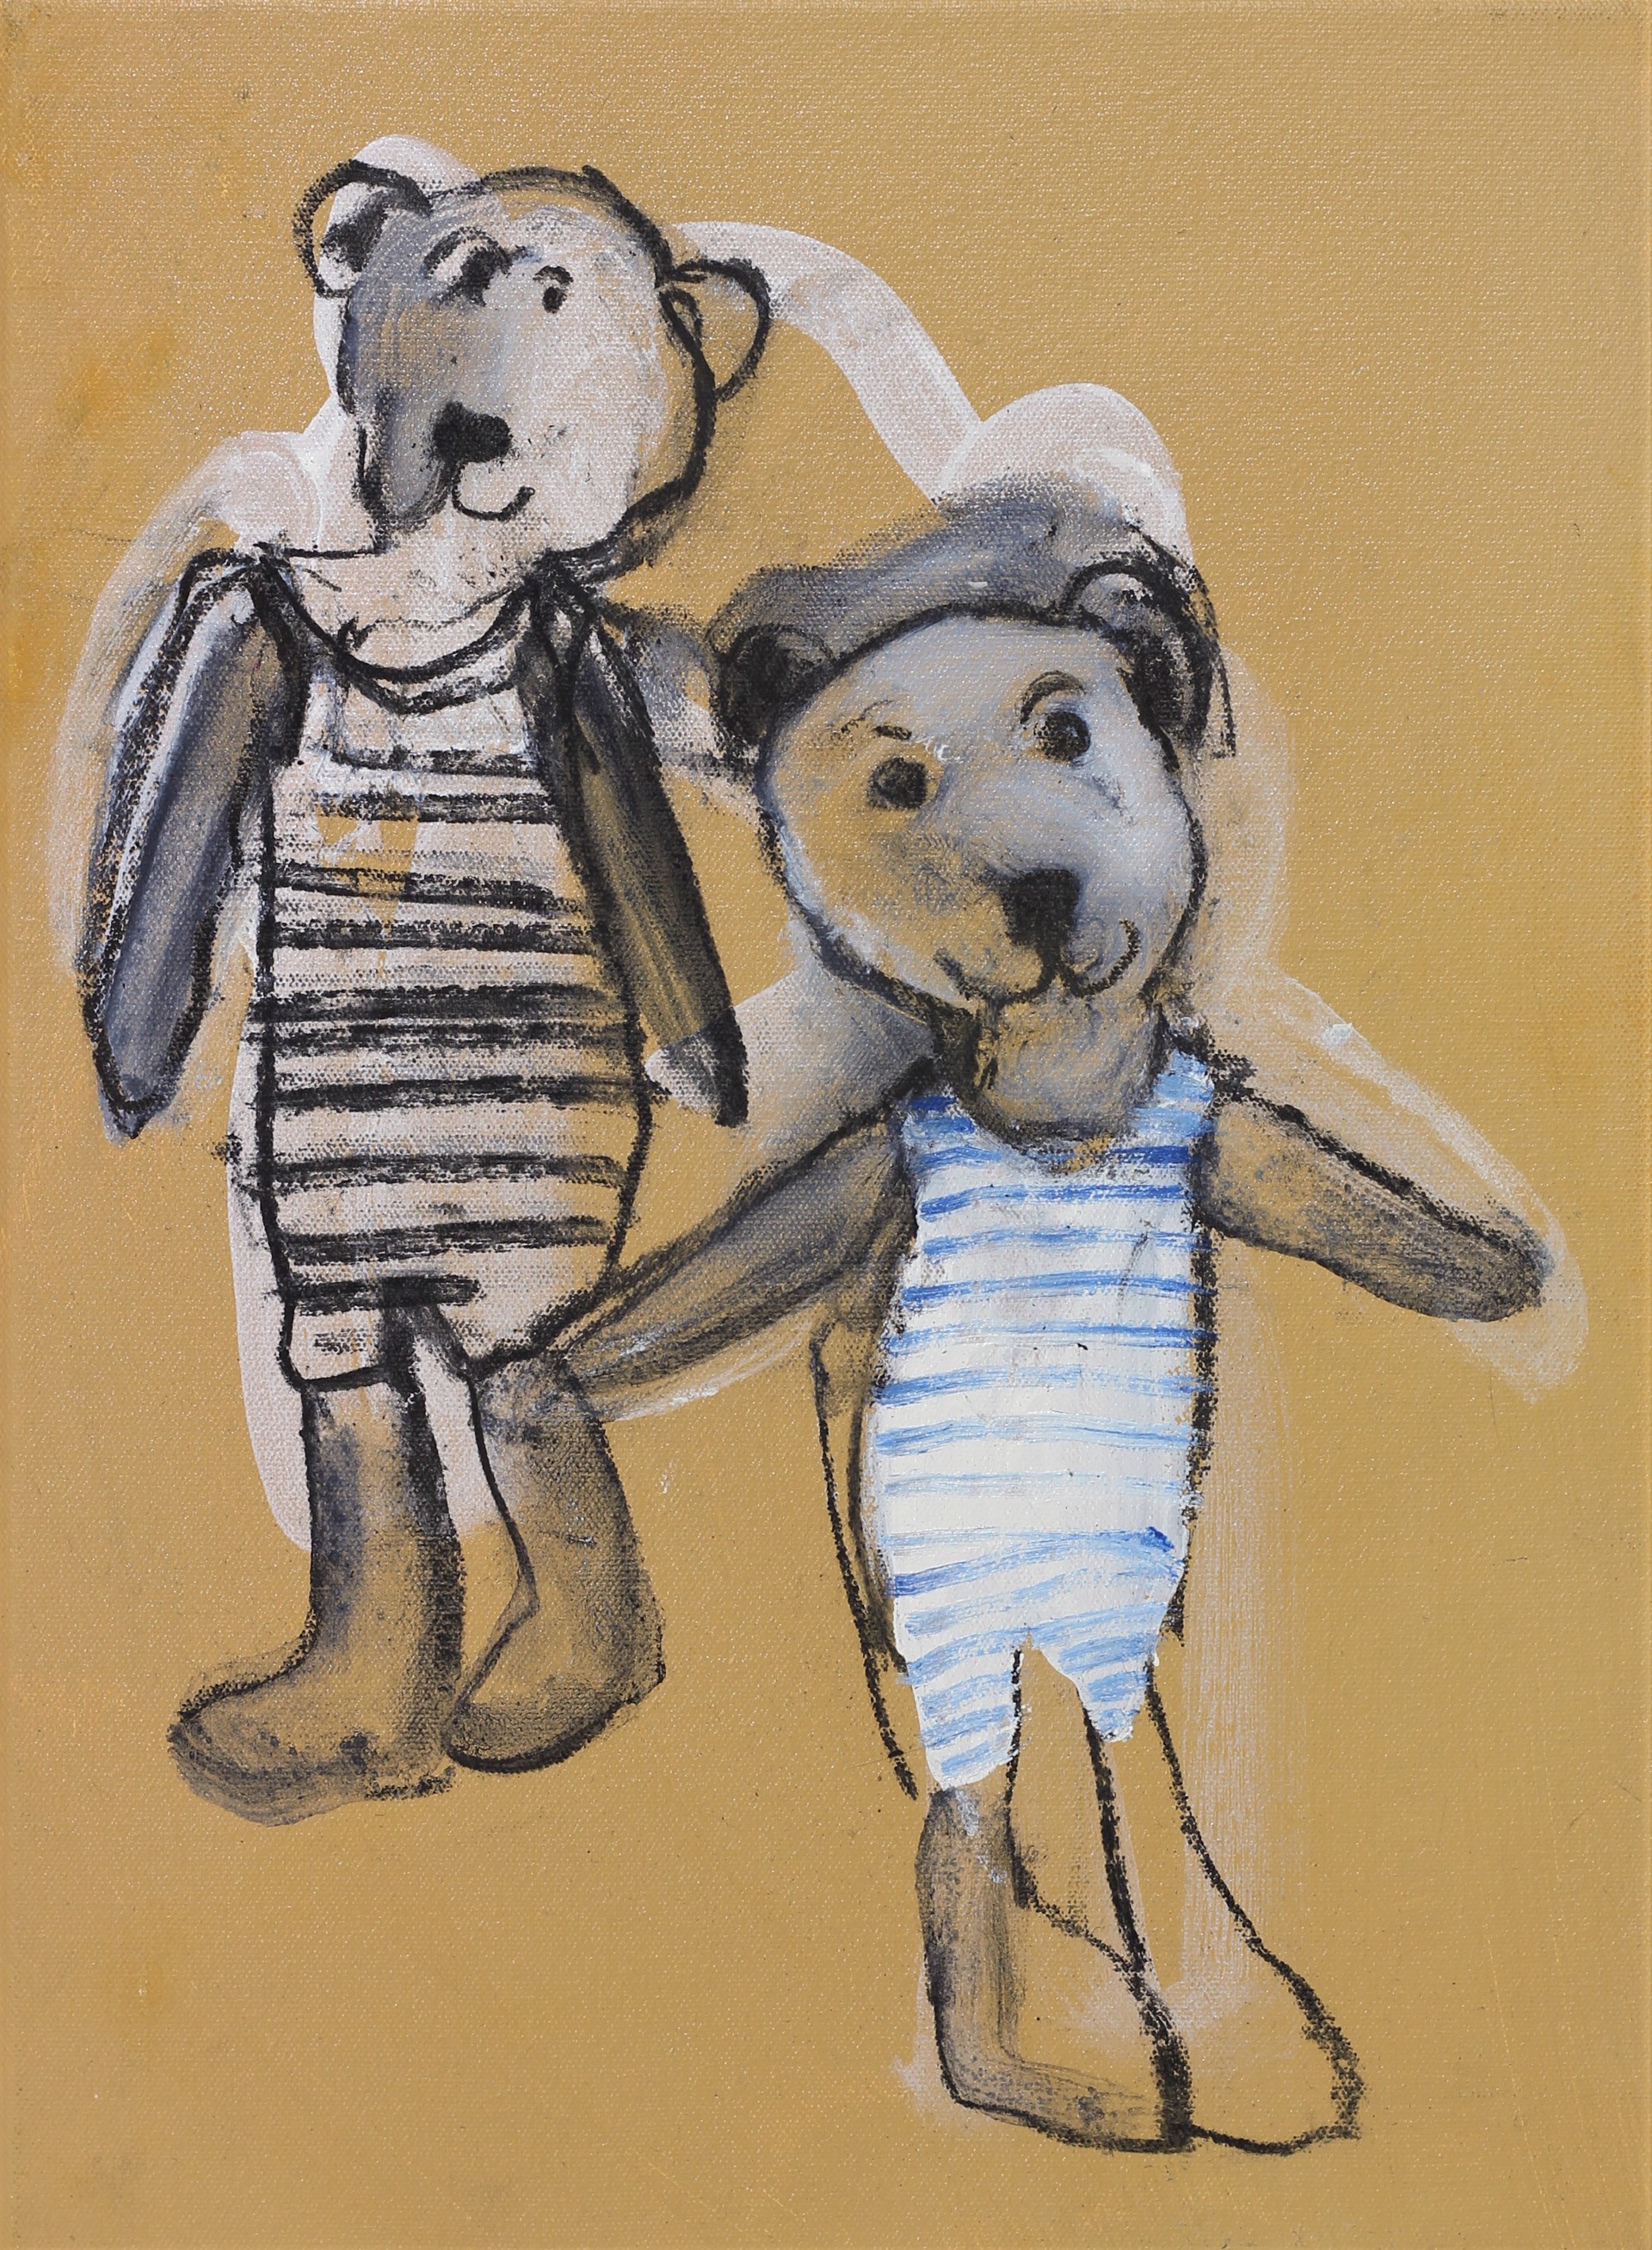 MR AND MRS BEAR by CHRISTINA THWAITES (Figures)